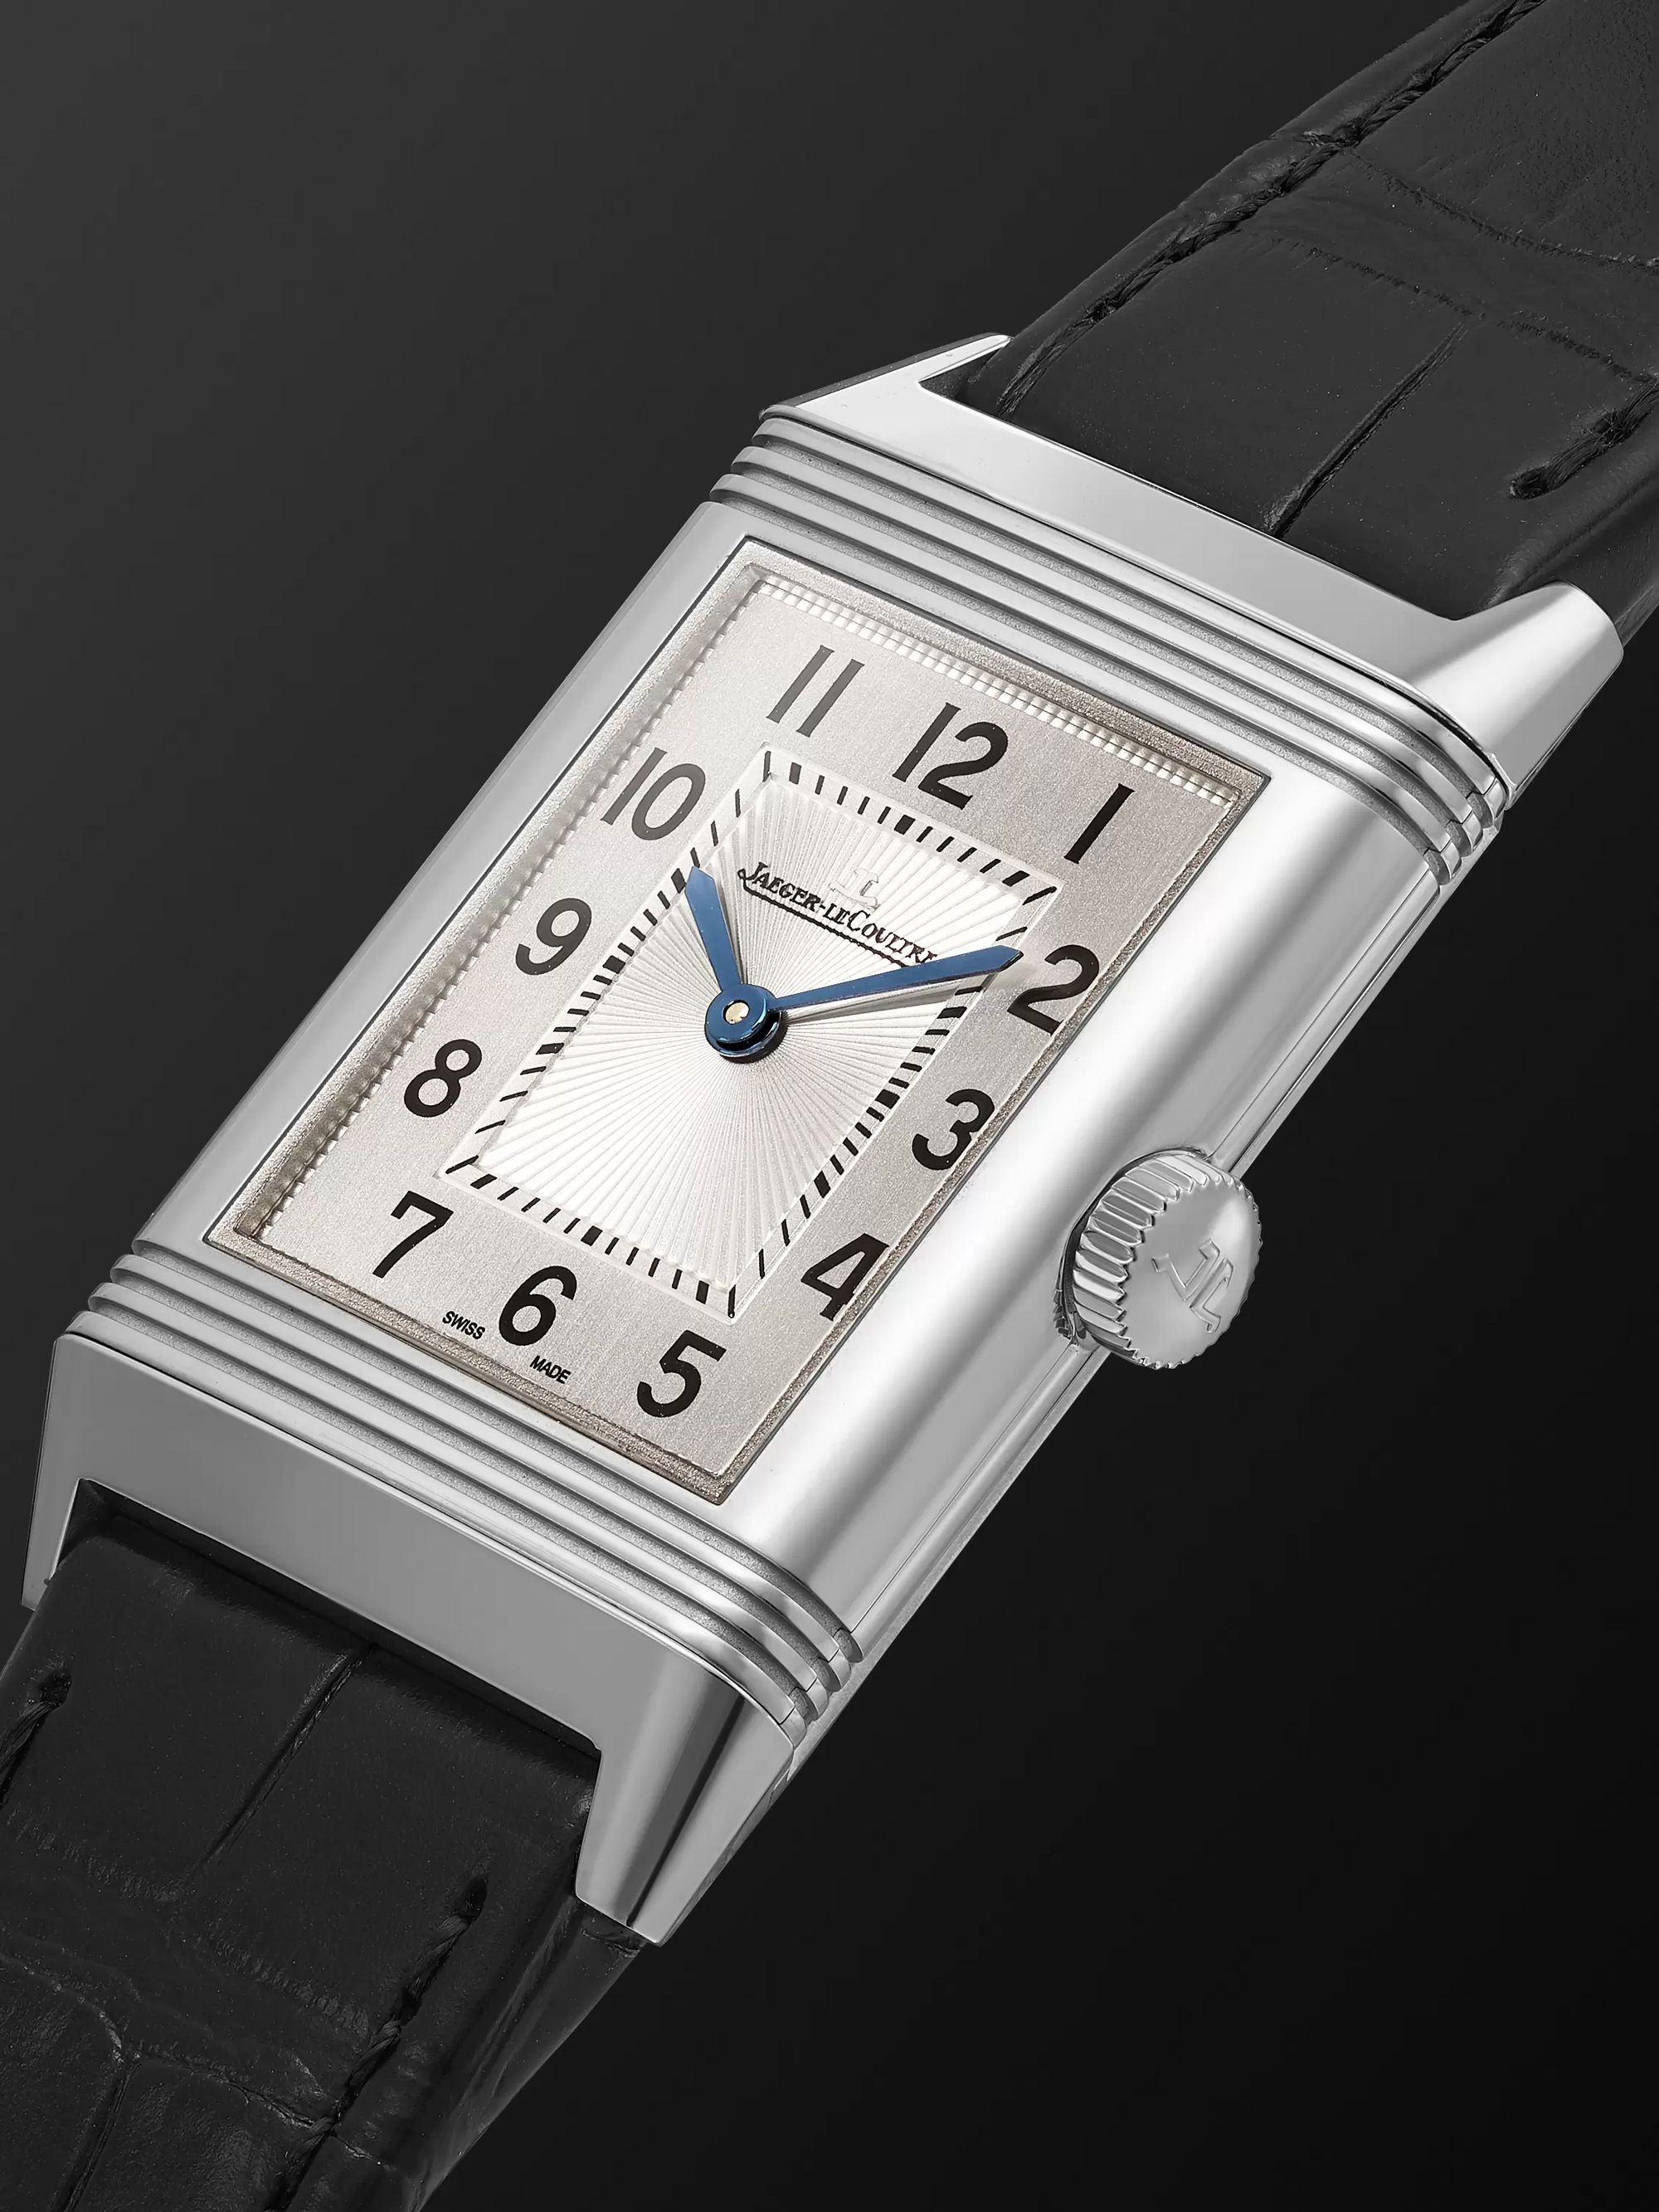 JAEGER-LECOULTRE Reverso Classic Medium Thin Hand-Wound 24.4mm Stainless Steel and Alligator Watch, Ref. No. Q2548440